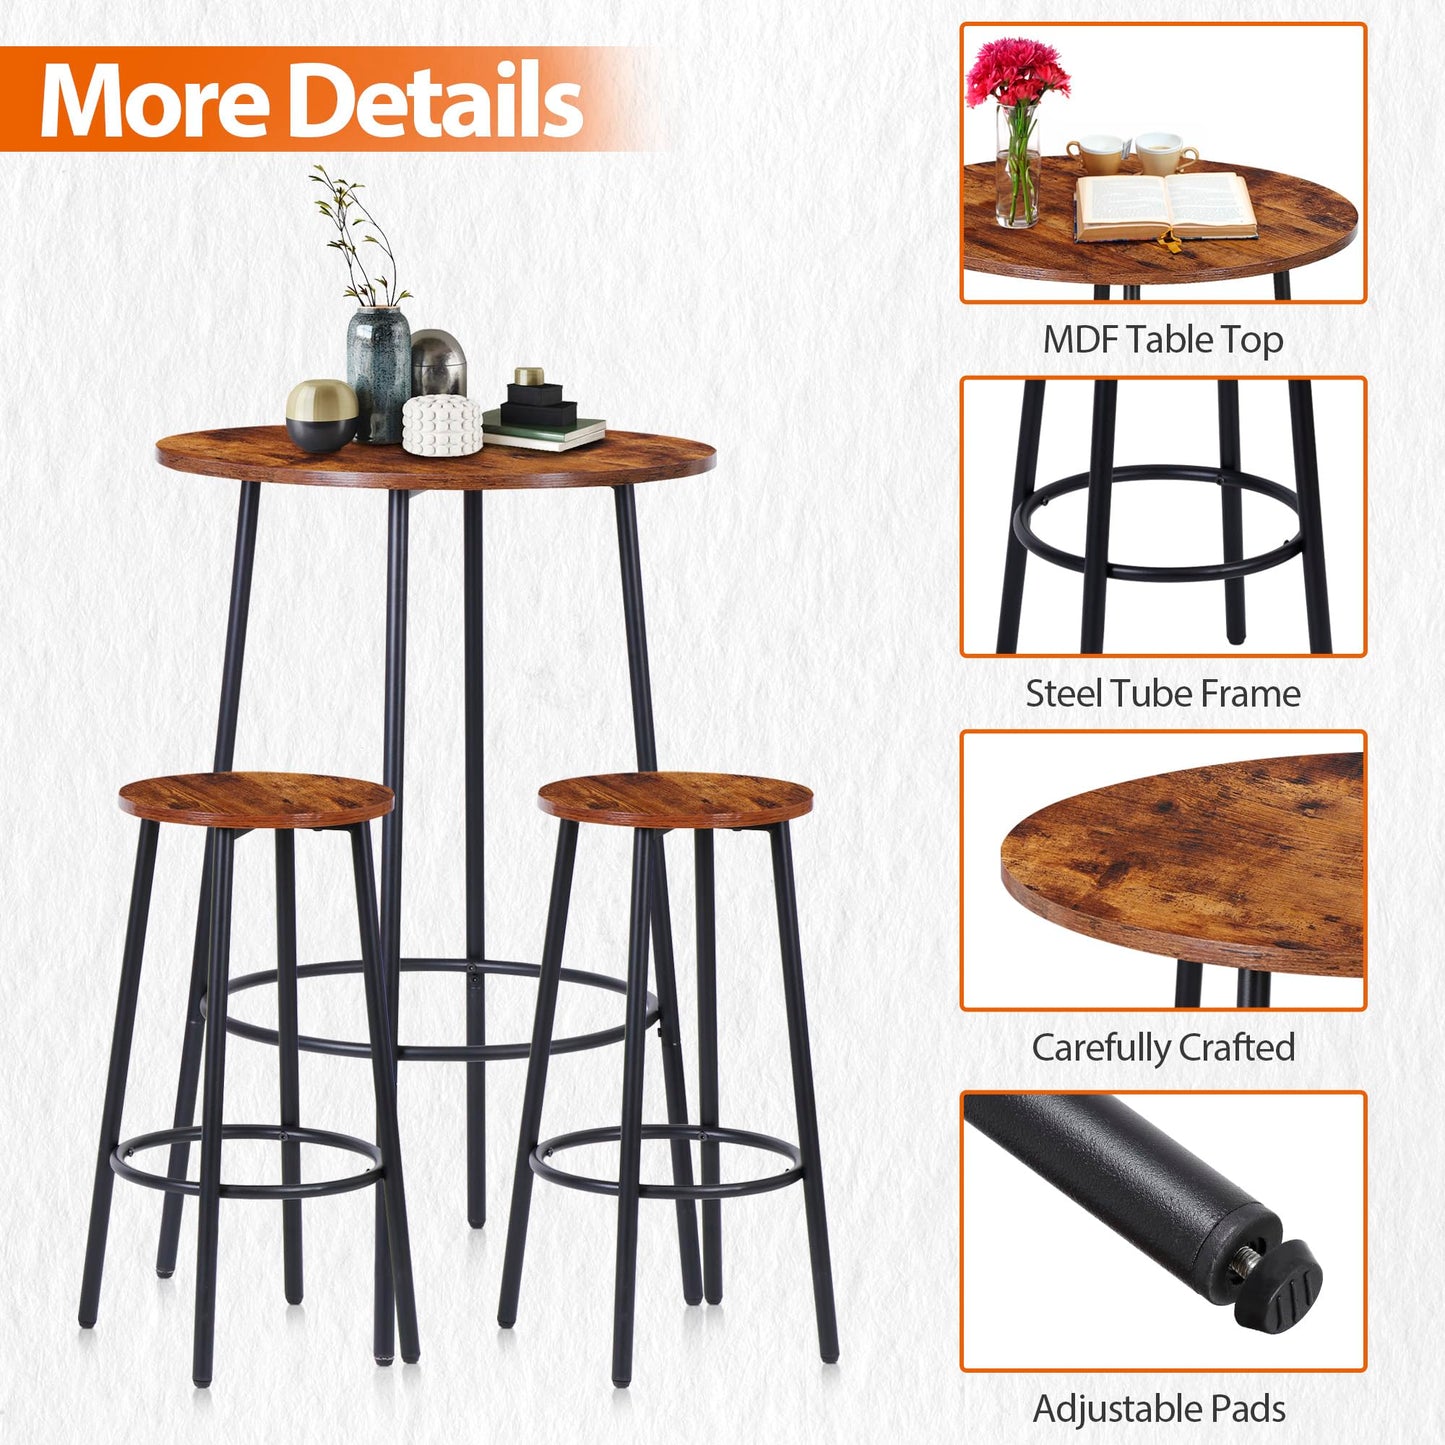 SUPER DEAL Round Pub Dining Set, 3 Piece Small Kitchen Table Set with 2 Counter Height Wood Bar Stools for Kitchen Breakfast, Living Room, Small Space, Rustic Brown